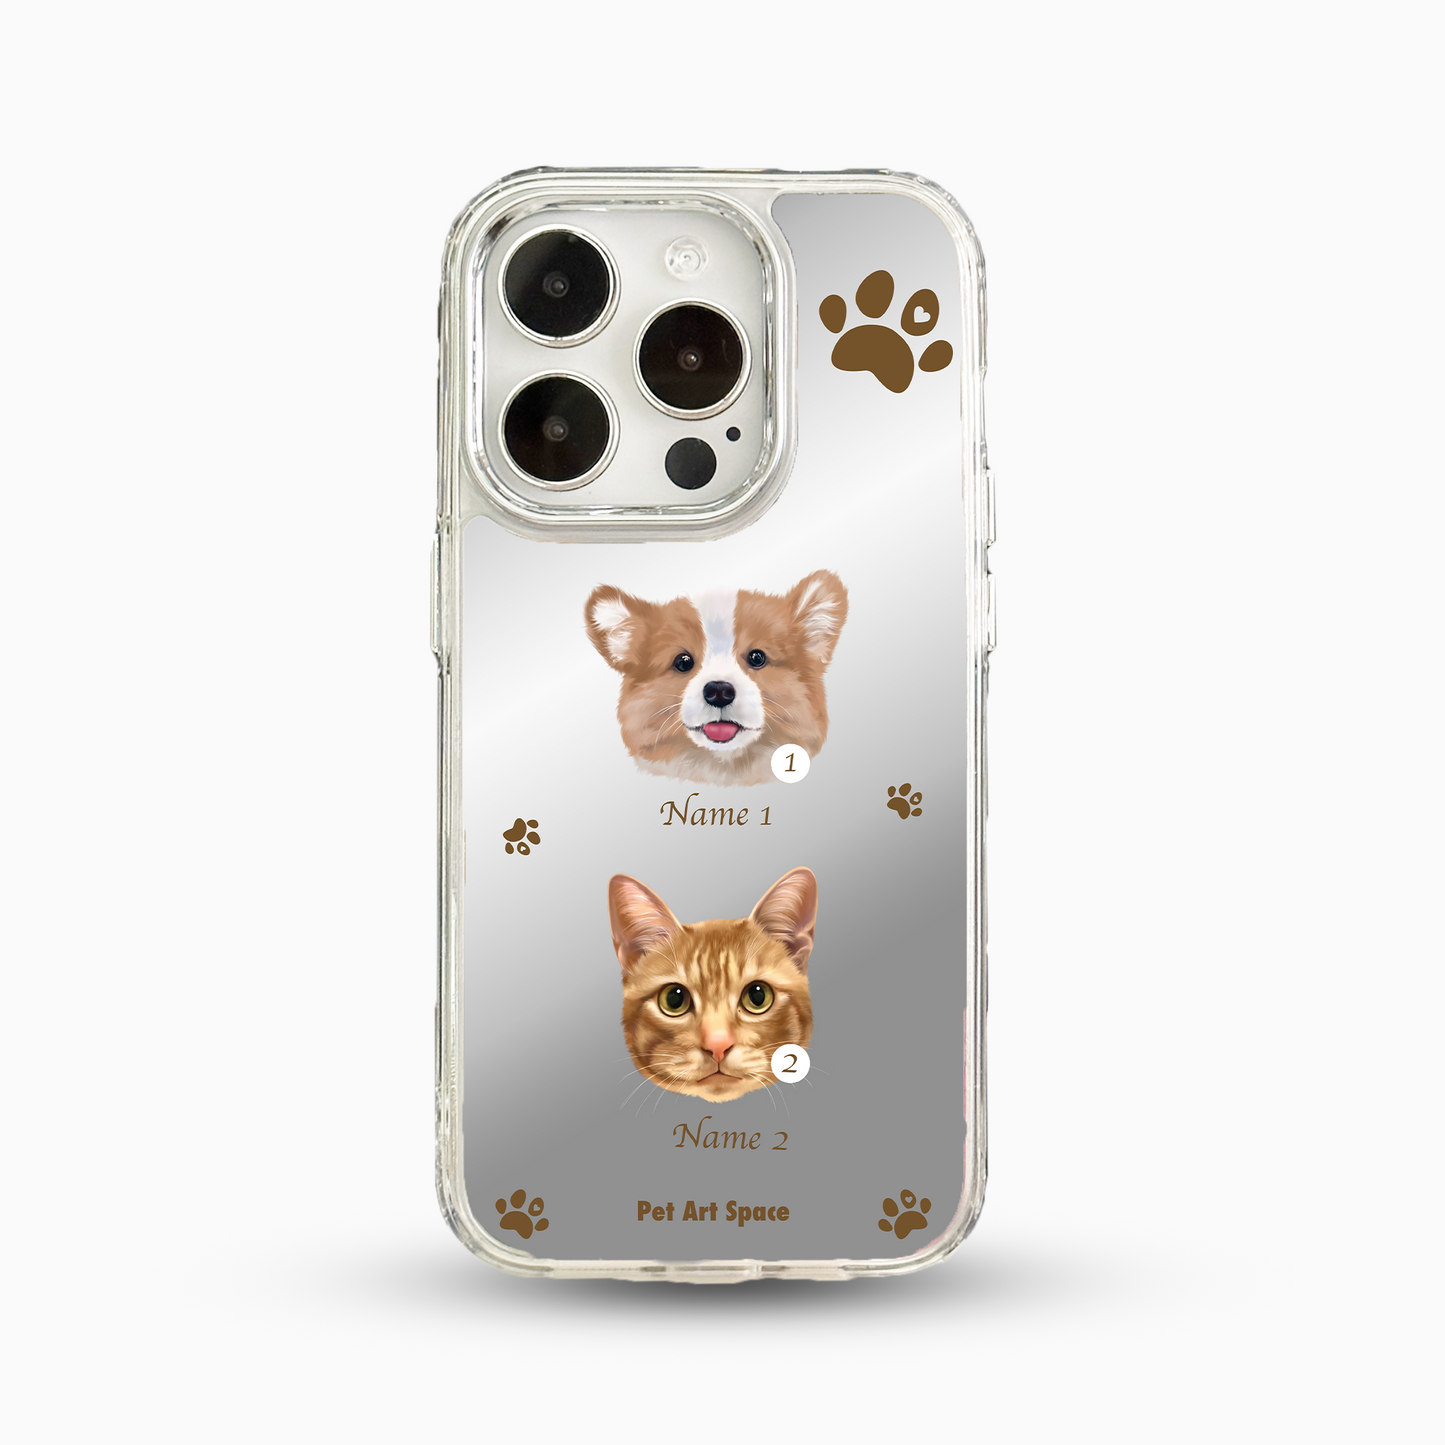 Paws B for 2 pets - Mirror Case C